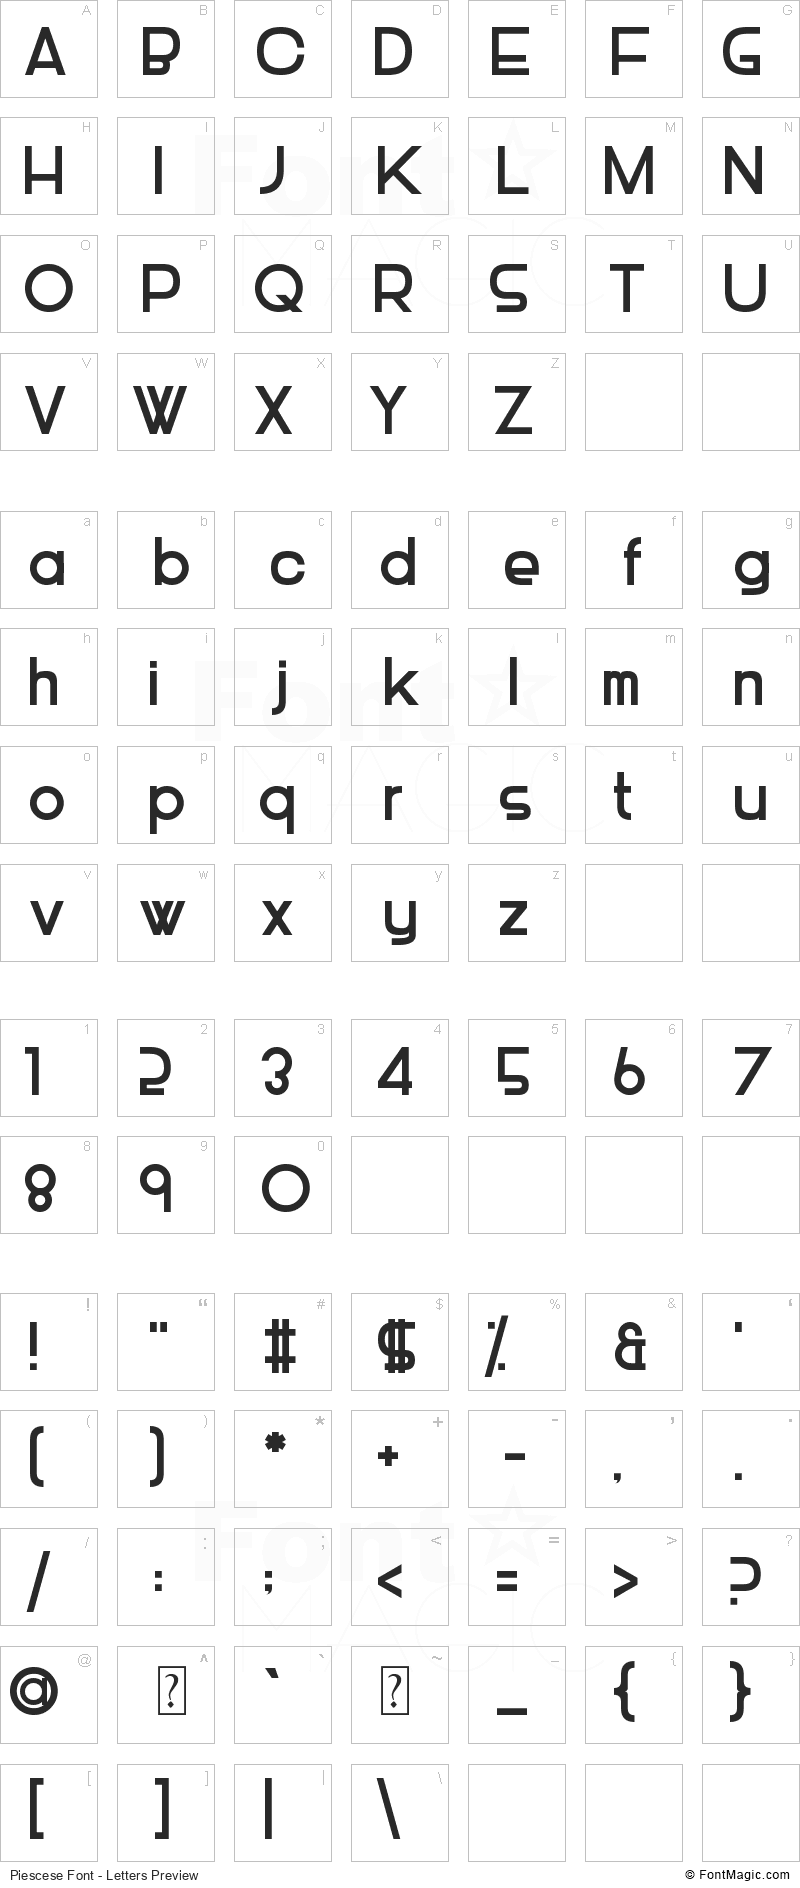 Piescese Font - All Latters Preview Chart